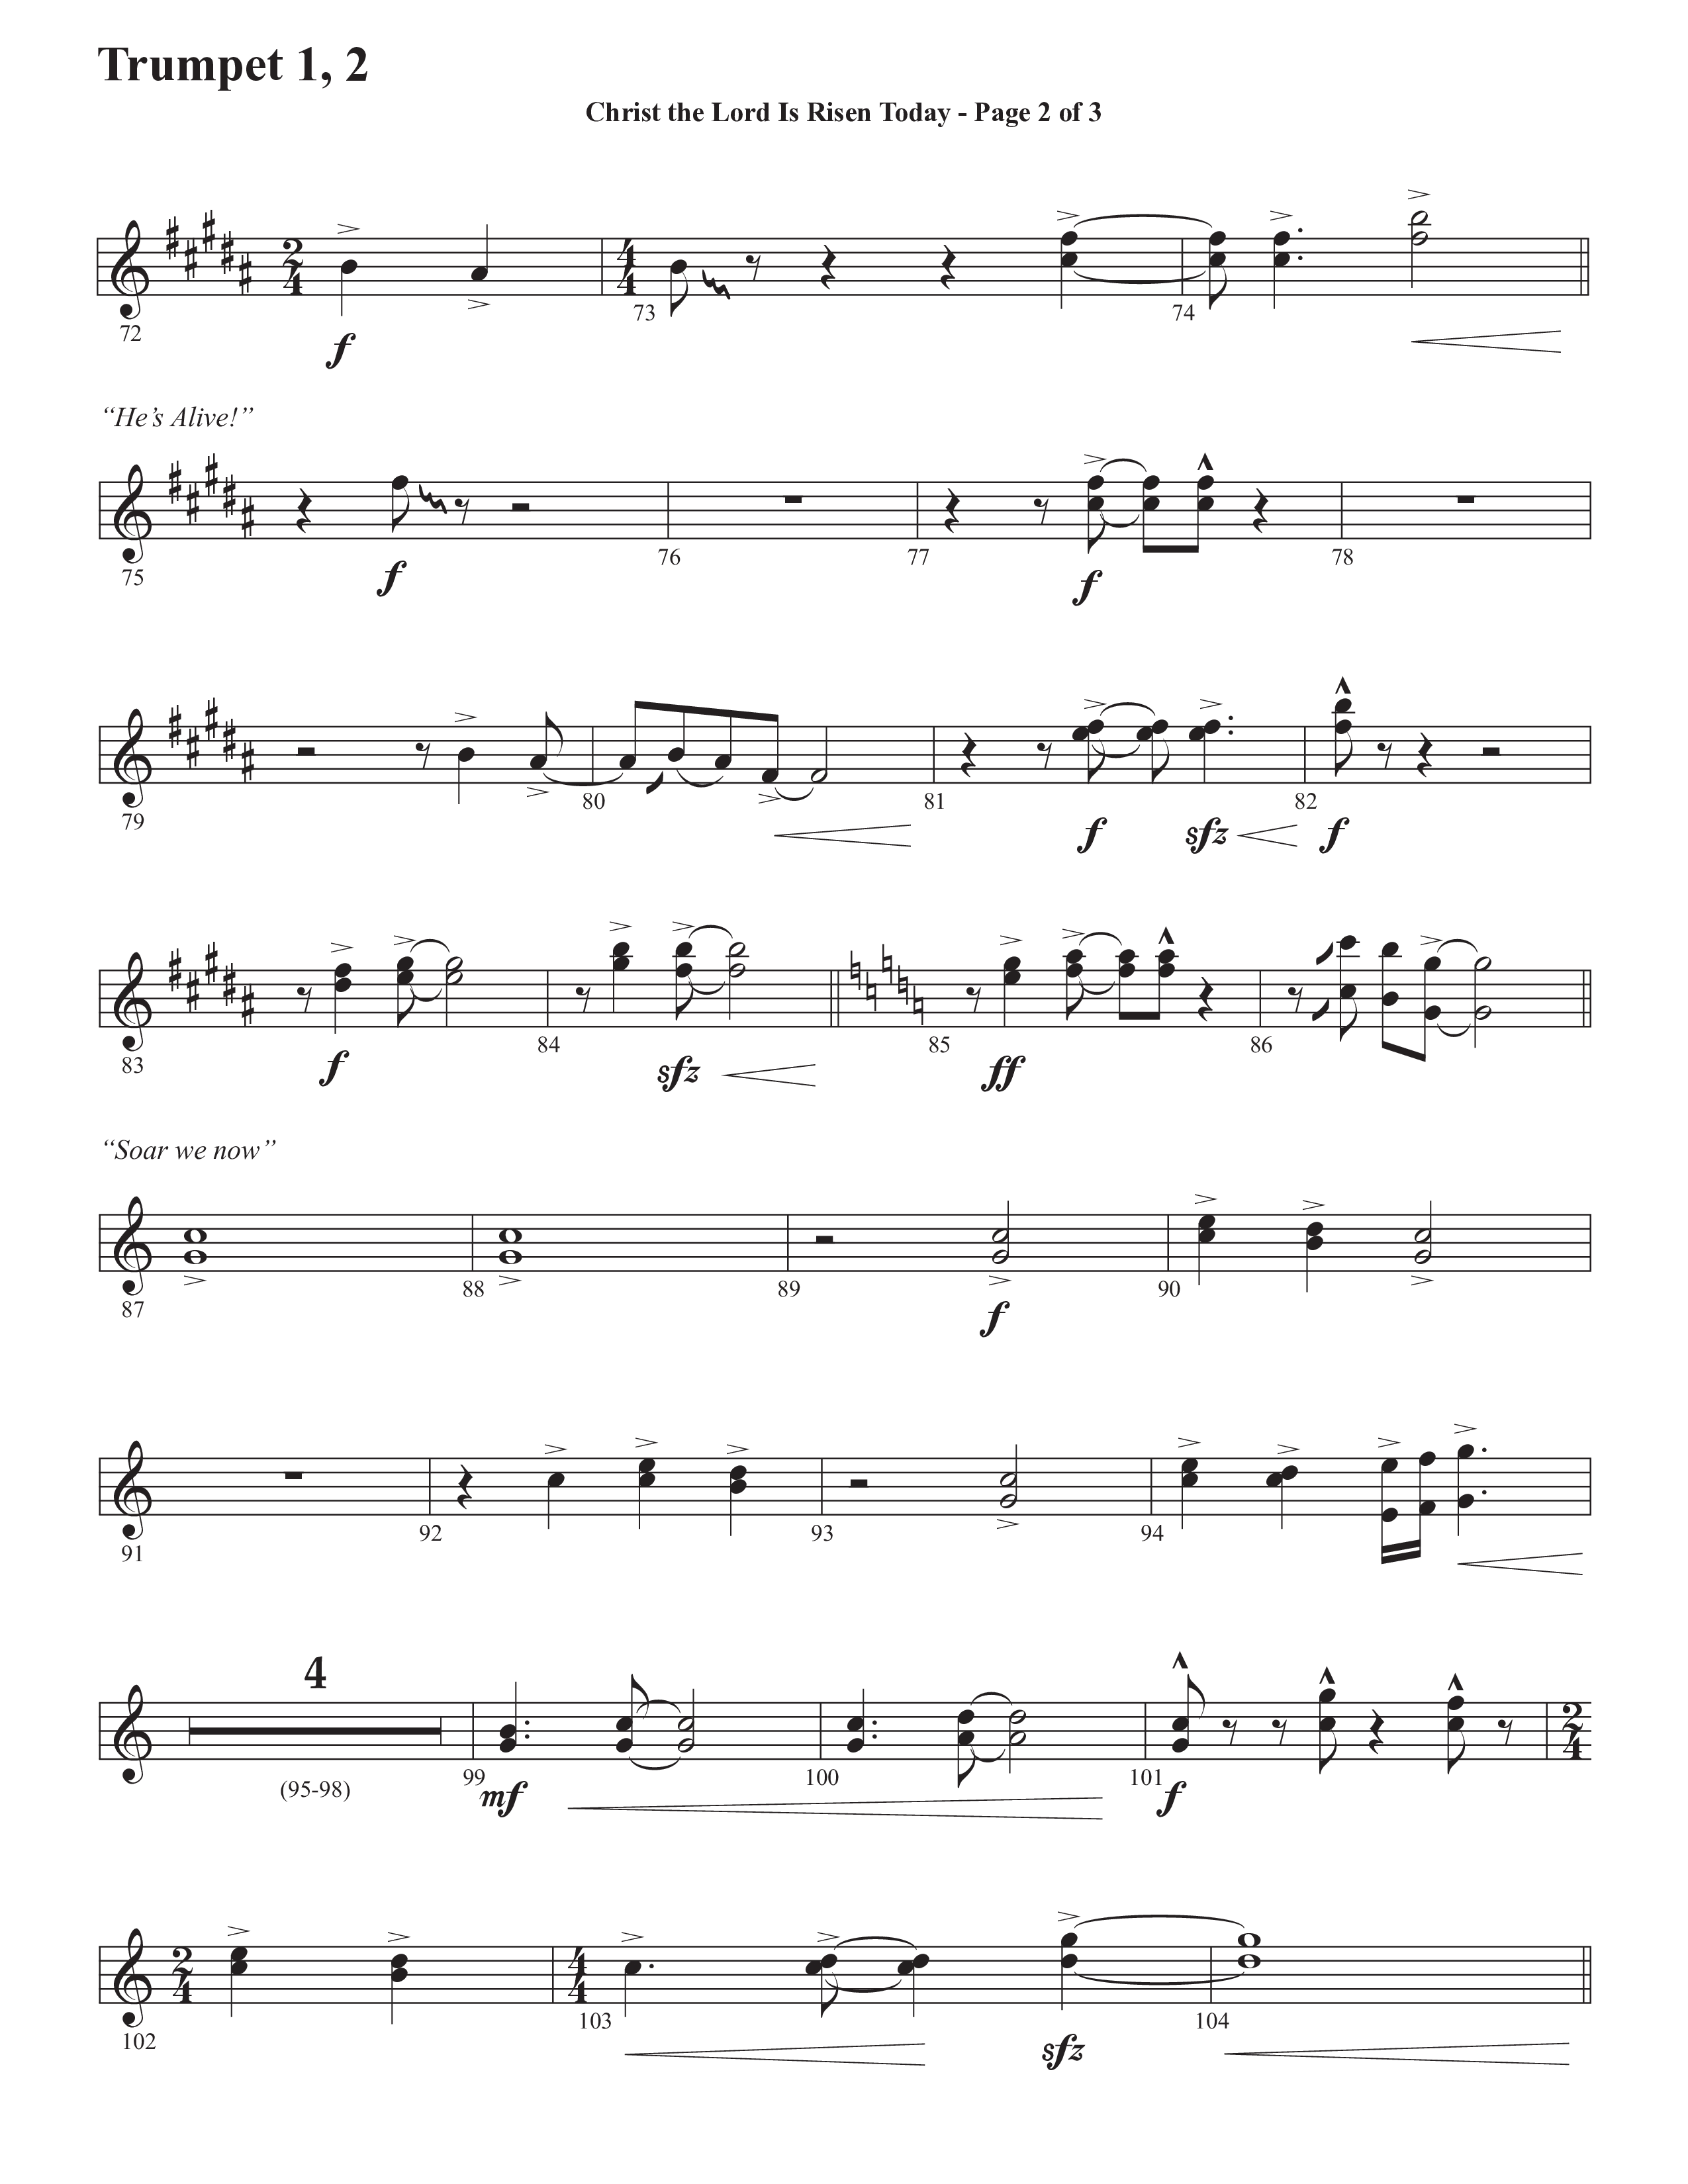 Christ The Lord Is Risen Today (He's Alive) (Choral Anthem SATB) Trumpet 1,2 (Semsen Music / Arr. John Bolin / Orch. Cliff Duren)